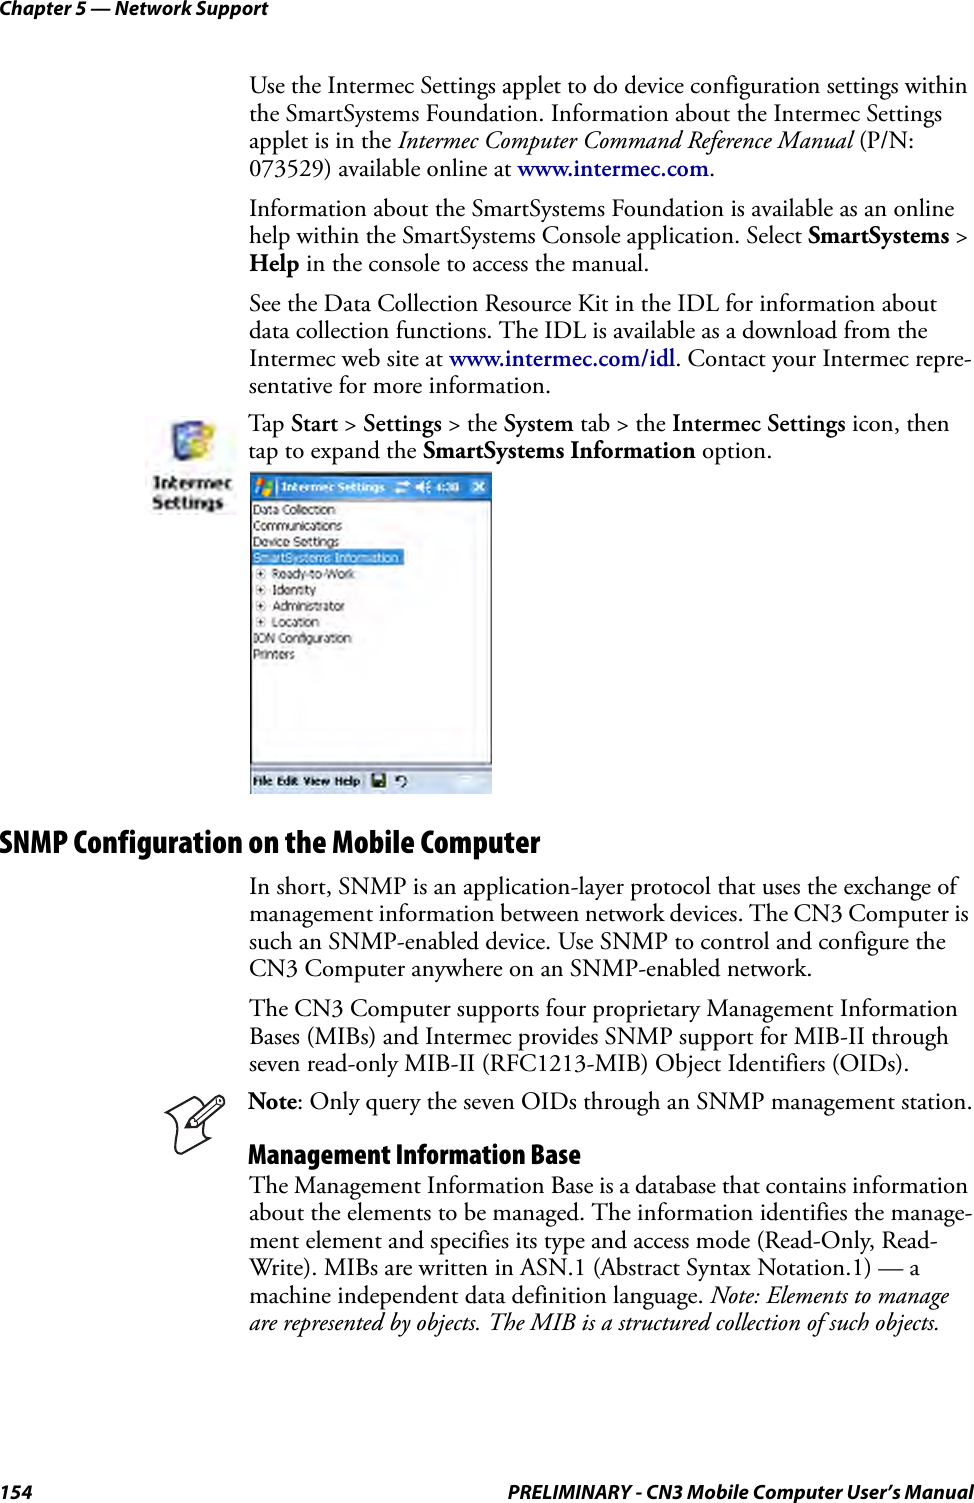 Chapter 5 — Network Support154 PRELIMINARY - CN3 Mobile Computer User’s ManualUse the Intermec Settings applet to do device configuration settings within the SmartSystems Foundation. Information about the Intermec Settings applet is in the Intermec Computer Command Reference Manual (P/N: 073529) available online at www.intermec.com.Information about the SmartSystems Foundation is available as an online help within the SmartSystems Console application. Select SmartSystems &gt; Help in the console to access the manual.See the Data Collection Resource Kit in the IDL for information about data collection functions. The IDL is available as a download from the Intermec web site at www.intermec.com/idl. Contact your Intermec repre-sentative for more information.SNMP Configuration on the Mobile ComputerIn short, SNMP is an application-layer protocol that uses the exchange of management information between network devices. The CN3 Computer is such an SNMP-enabled device. Use SNMP to control and configure the CN3 Computer anywhere on an SNMP-enabled network.The CN3 Computer supports four proprietary Management Information Bases (MIBs) and Intermec provides SNMP support for MIB-II through seven read-only MIB-II (RFC1213-MIB) Object Identifiers (OIDs).The Management Information Base is a database that contains information about the elements to be managed. The information identifies the manage-ment element and specifies its type and access mode (Read-Only, Read-Write). MIBs are written in ASN.1 (Abstract Syntax Notation.1) — a machine independent data definition language. Note: Elements to manage are represented by objects. The MIB is a structured collection of such objects. Tap  Start &gt; Settings &gt; the System tab &gt; the Intermec Settings icon, then tap to expand the SmartSystems Information option.Note: Only query the seven OIDs through an SNMP management station.Management Information Base